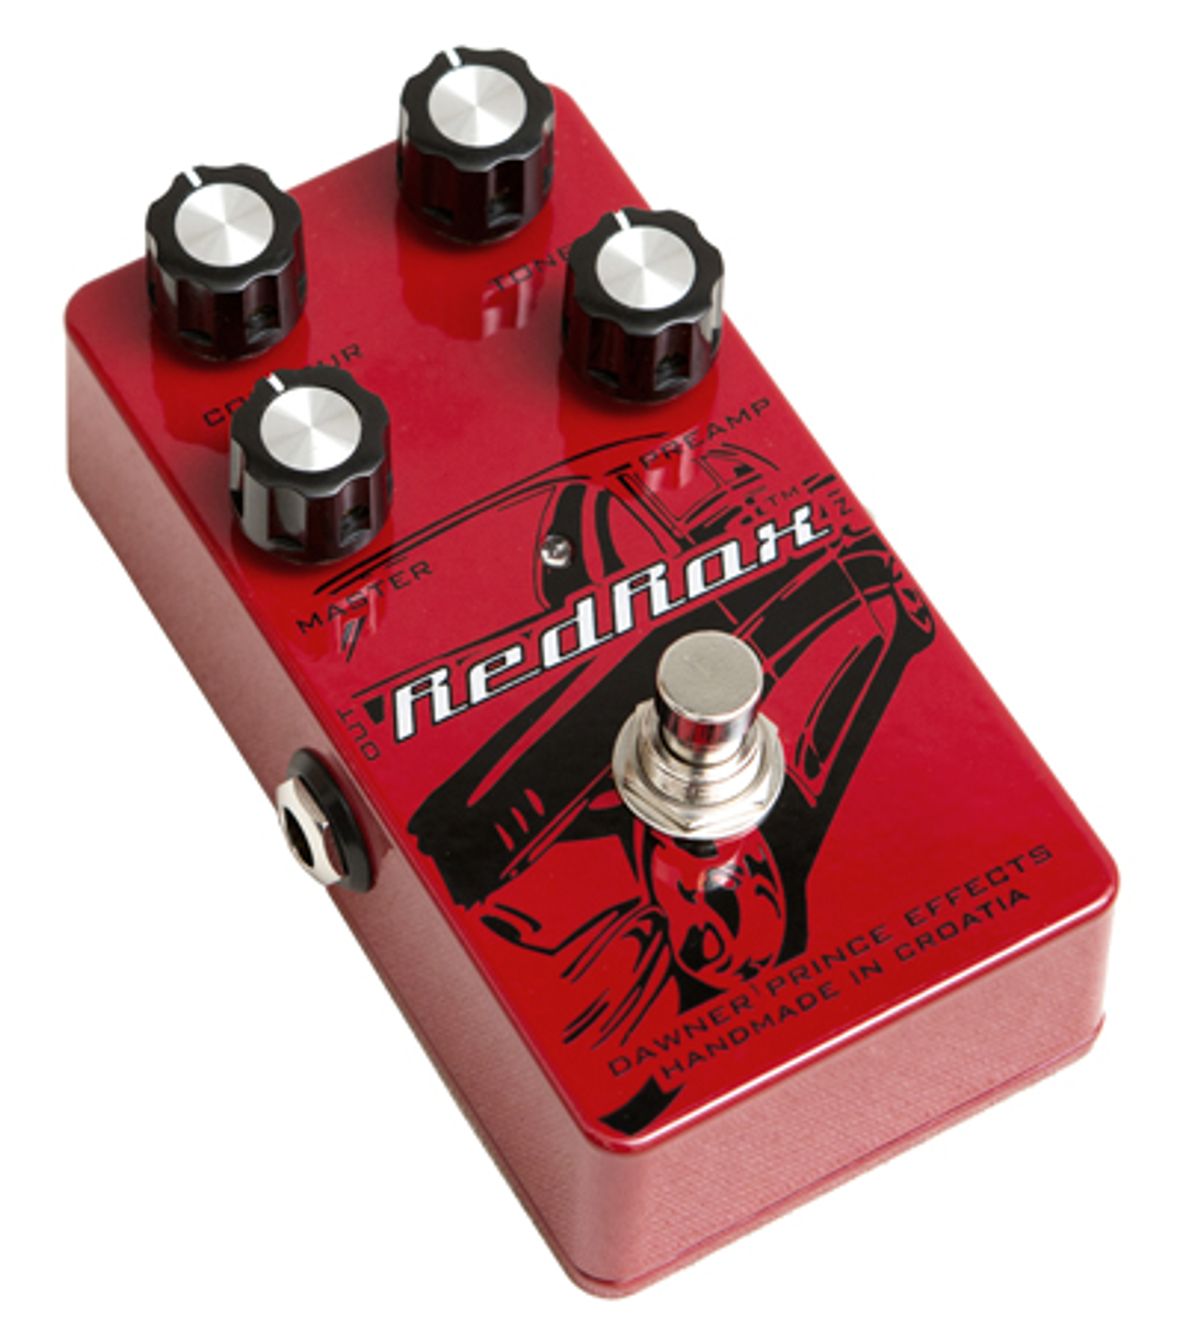 Dawner Prince Effects Announces Red Rox Distortion Pedal